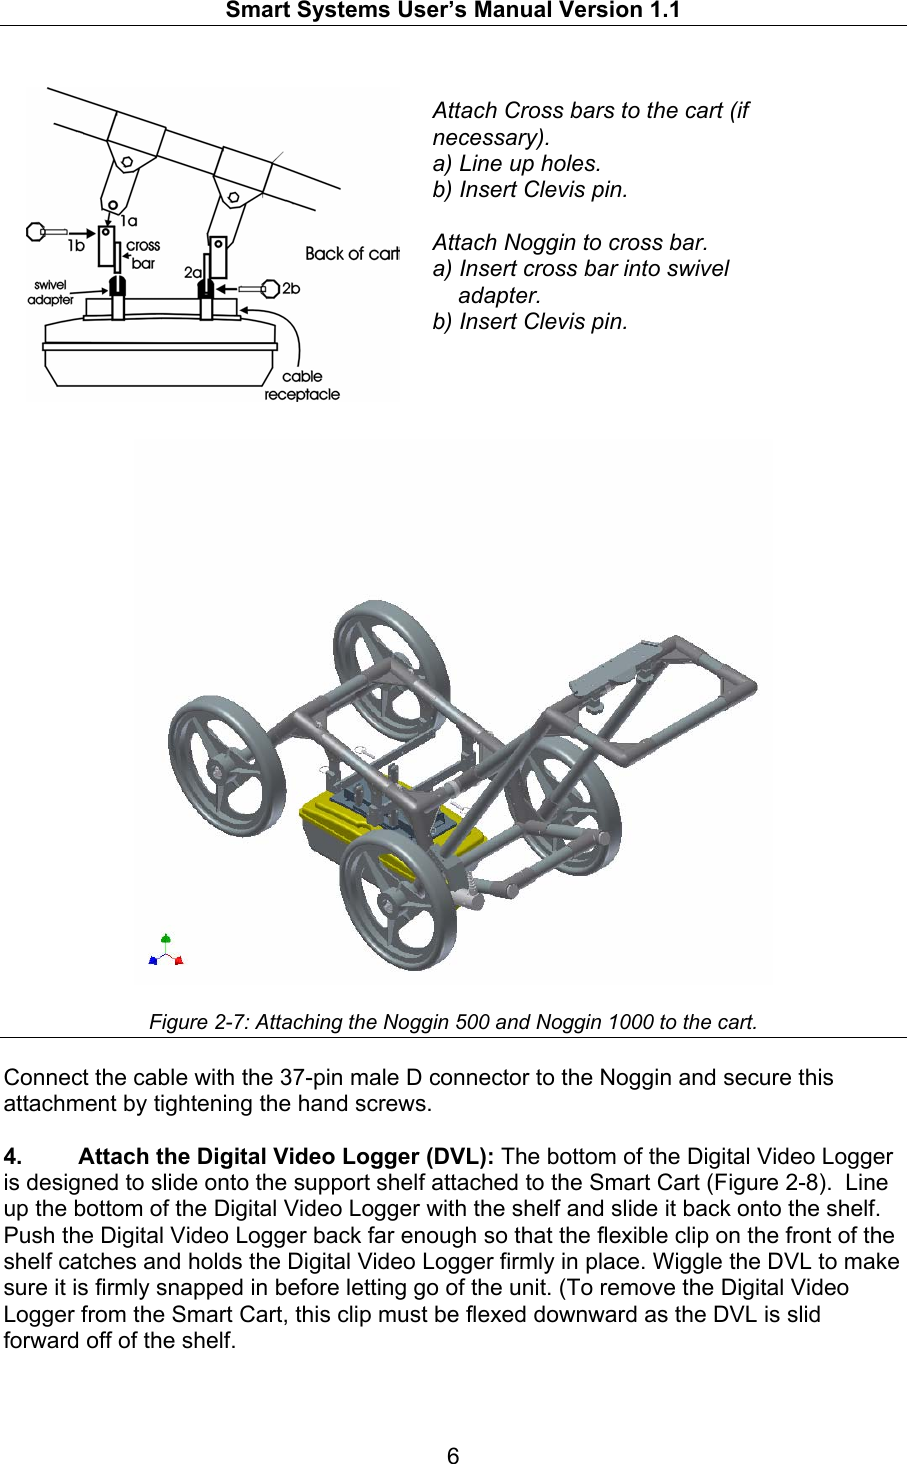   Smart Systems User’s Manual Version 1.1  6   Attach Cross bars to the cart (if necessary). a) Line up holes. b) Insert Clevis pin.  Attach Noggin to cross bar. a) Insert cross bar into swivel      adapter. b) Insert Clevis pin.       Figure 2-7: Attaching the Noggin 500 and Noggin 1000 to the cart.  Connect the cable with the 37-pin male D connector to the Noggin and secure this attachment by tightening the hand screws.  4.  Attach the Digital Video Logger (DVL): The bottom of the Digital Video Logger is designed to slide onto the support shelf attached to the Smart Cart (Figure 2-8).  Line up the bottom of the Digital Video Logger with the shelf and slide it back onto the shelf. Push the Digital Video Logger back far enough so that the flexible clip on the front of the shelf catches and holds the Digital Video Logger firmly in place. Wiggle the DVL to make sure it is firmly snapped in before letting go of the unit. (To remove the Digital Video Logger from the Smart Cart, this clip must be flexed downward as the DVL is slid forward off of the shelf.  